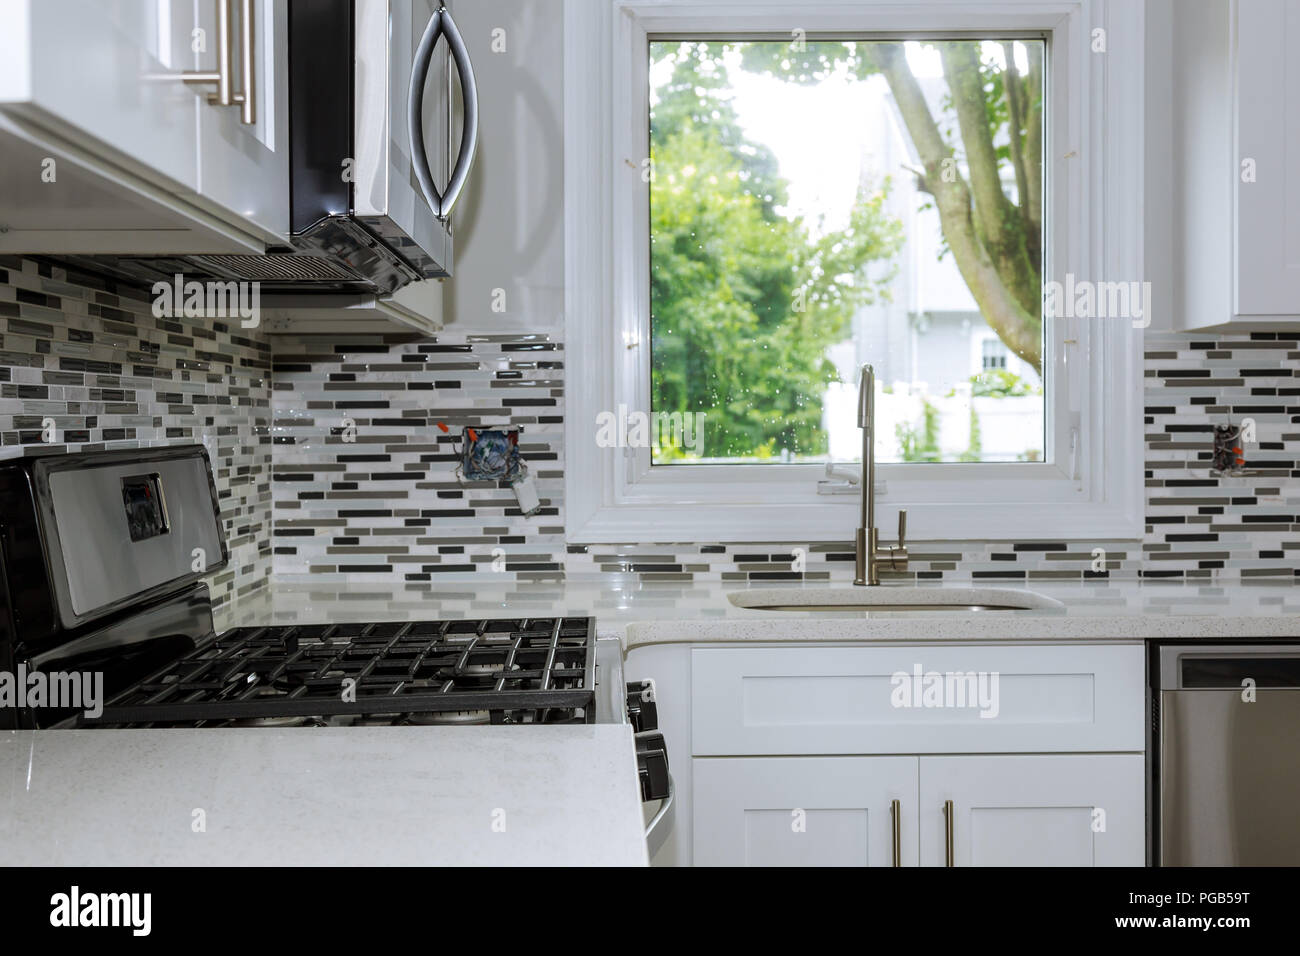 New modern white kitchen Stainless steel sink on the kitchen with built in oven and chrome water tap Stock Photo